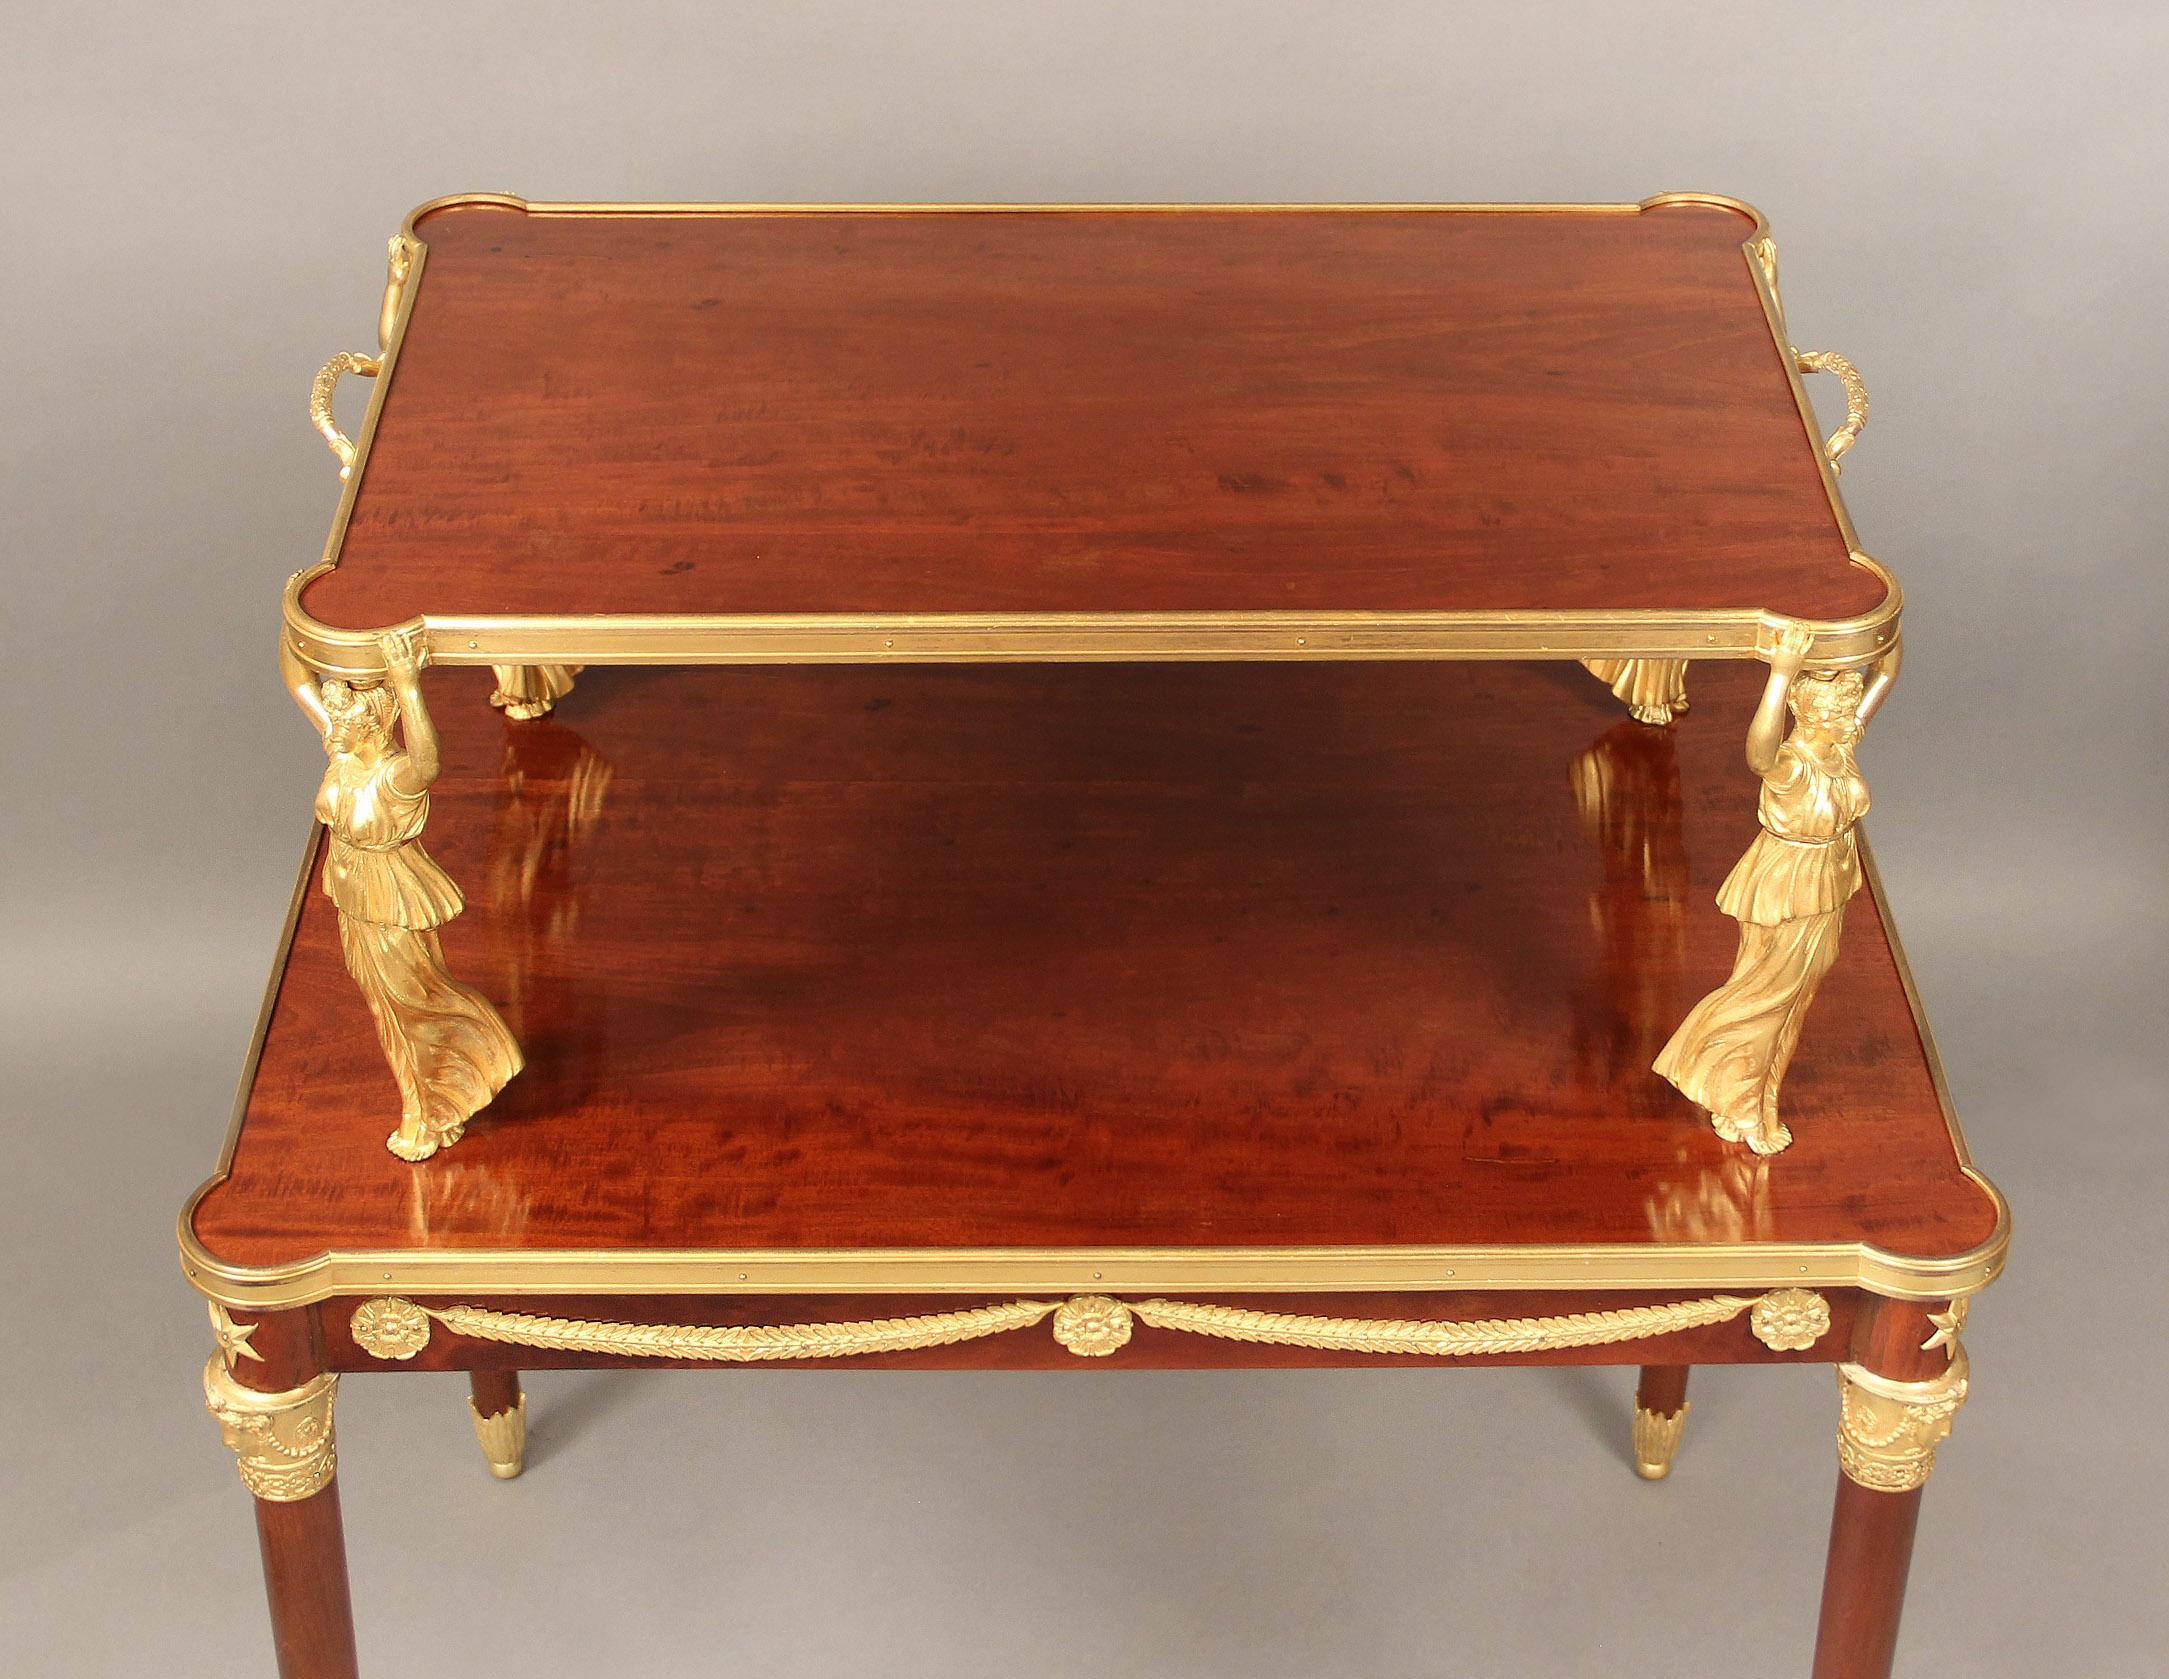 Belle Époque Interesting Late 19th Century Gilt Bronze Mounted Empire Style Tea Table For Sale